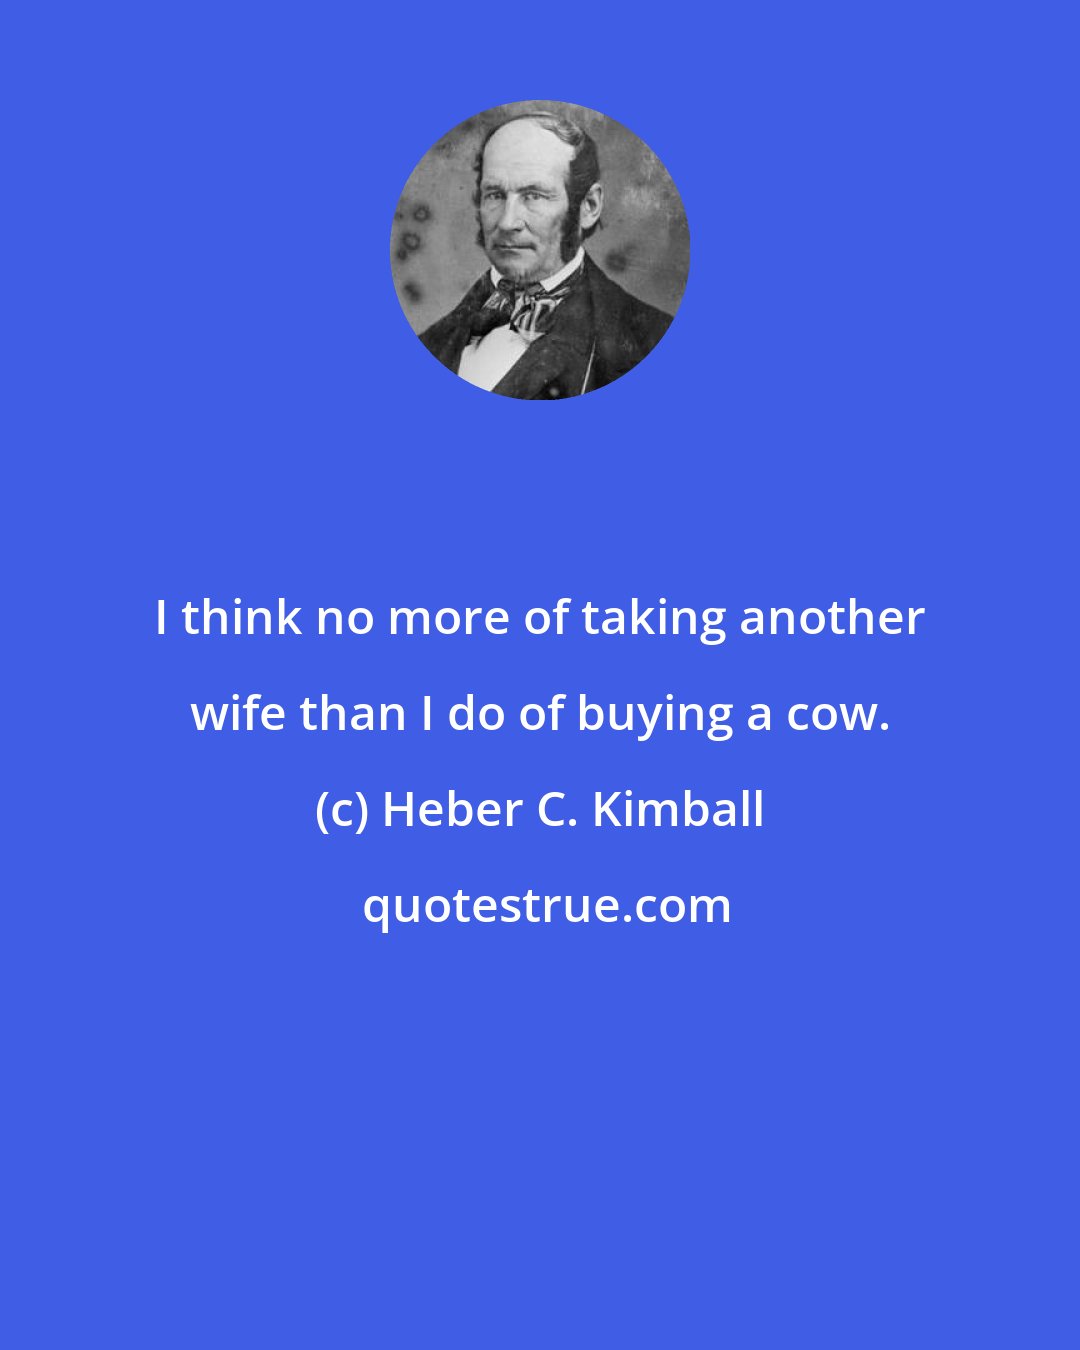 Heber C. Kimball: I think no more of taking another wife than I do of buying a cow.